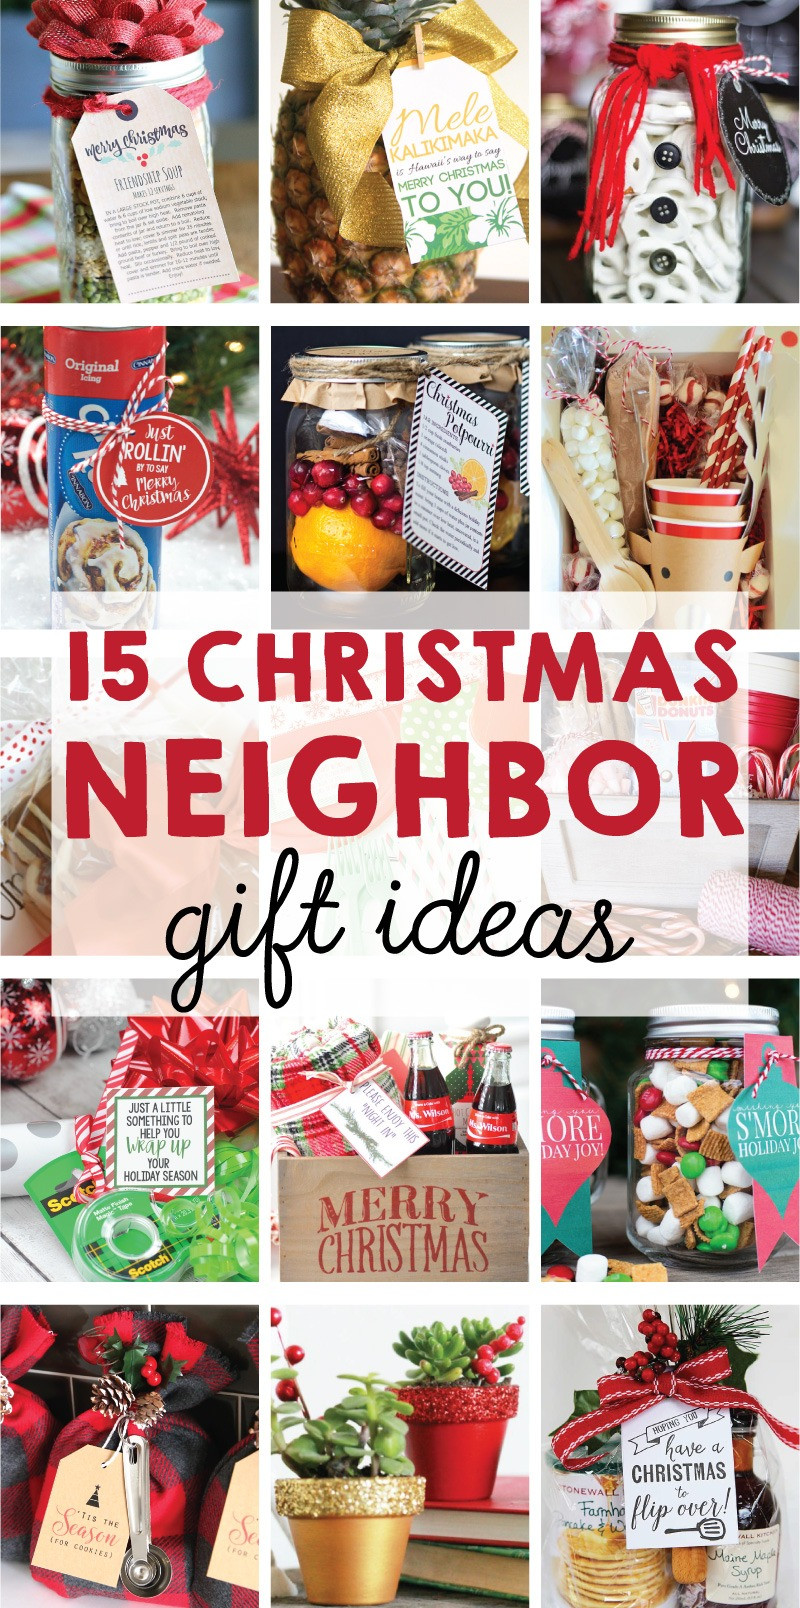 Holiday Gift Ideas For Neighbors
 The BEST 15 Christmas Neighbor Gift Ideas on Love the Day